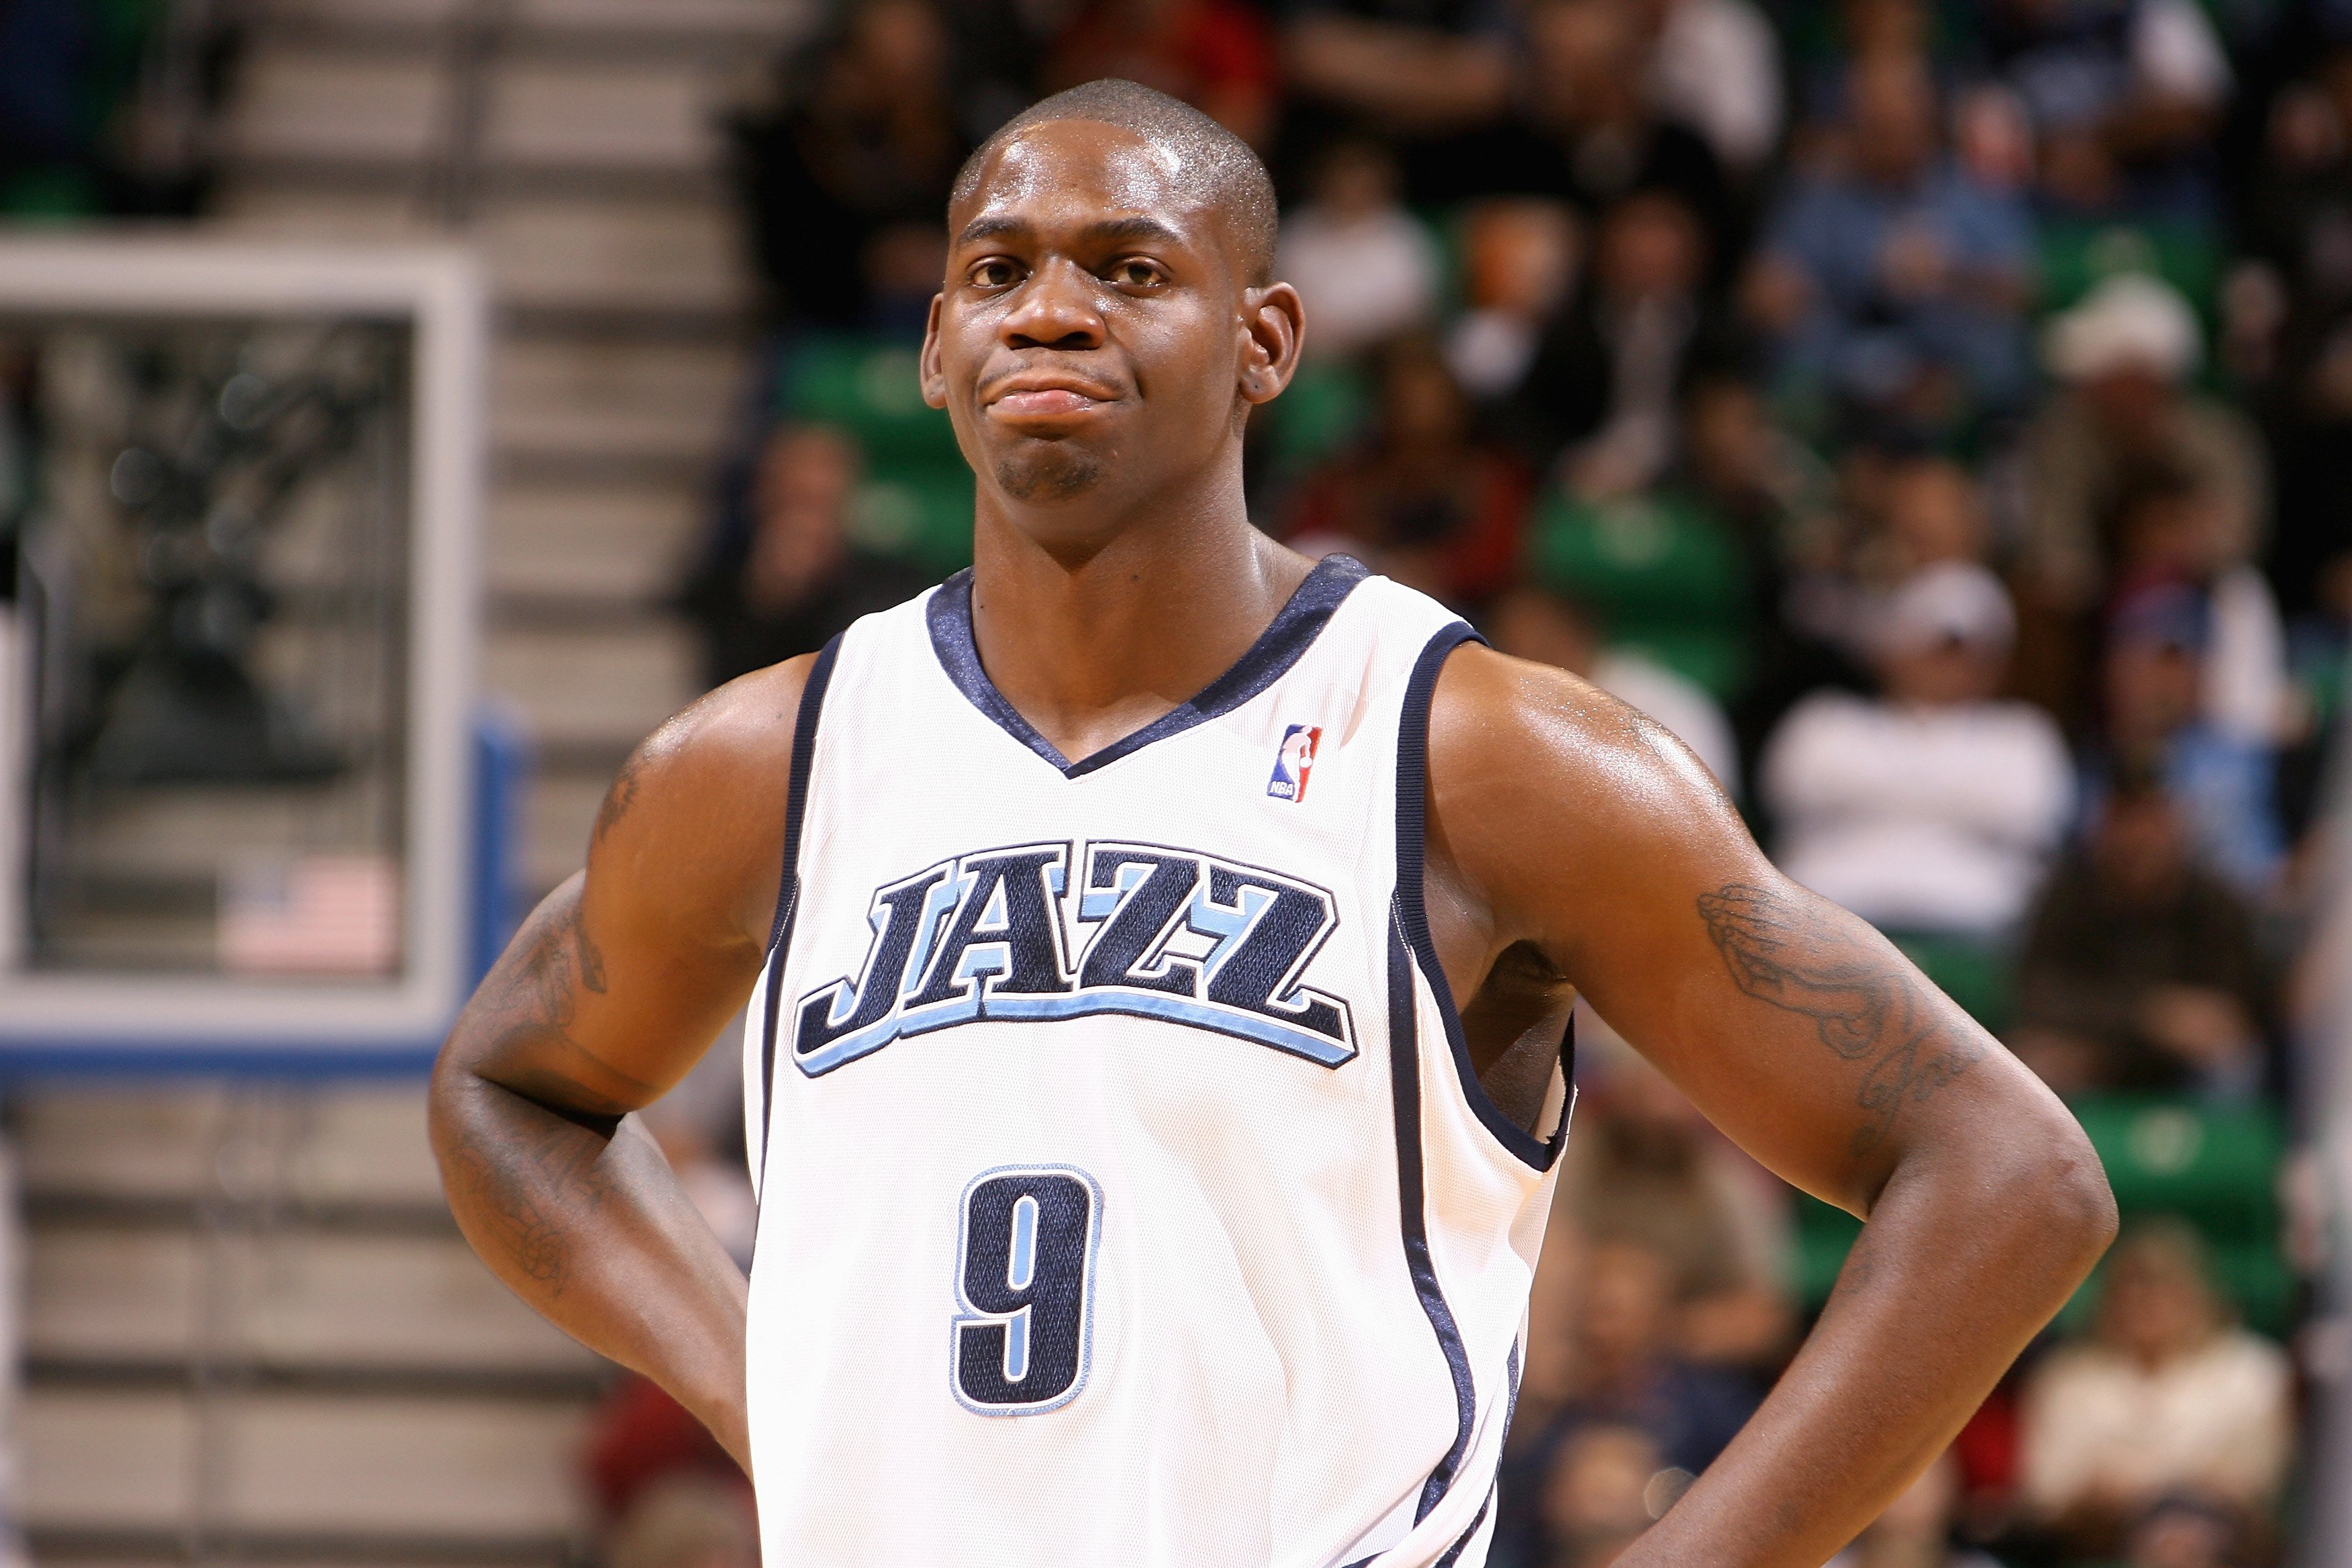 Ronnie Brewer #9 of the Utah Jazz looks across the court during the game against the Minnesota Timberwolves on December 14, 2009 | Photo: GettyImages